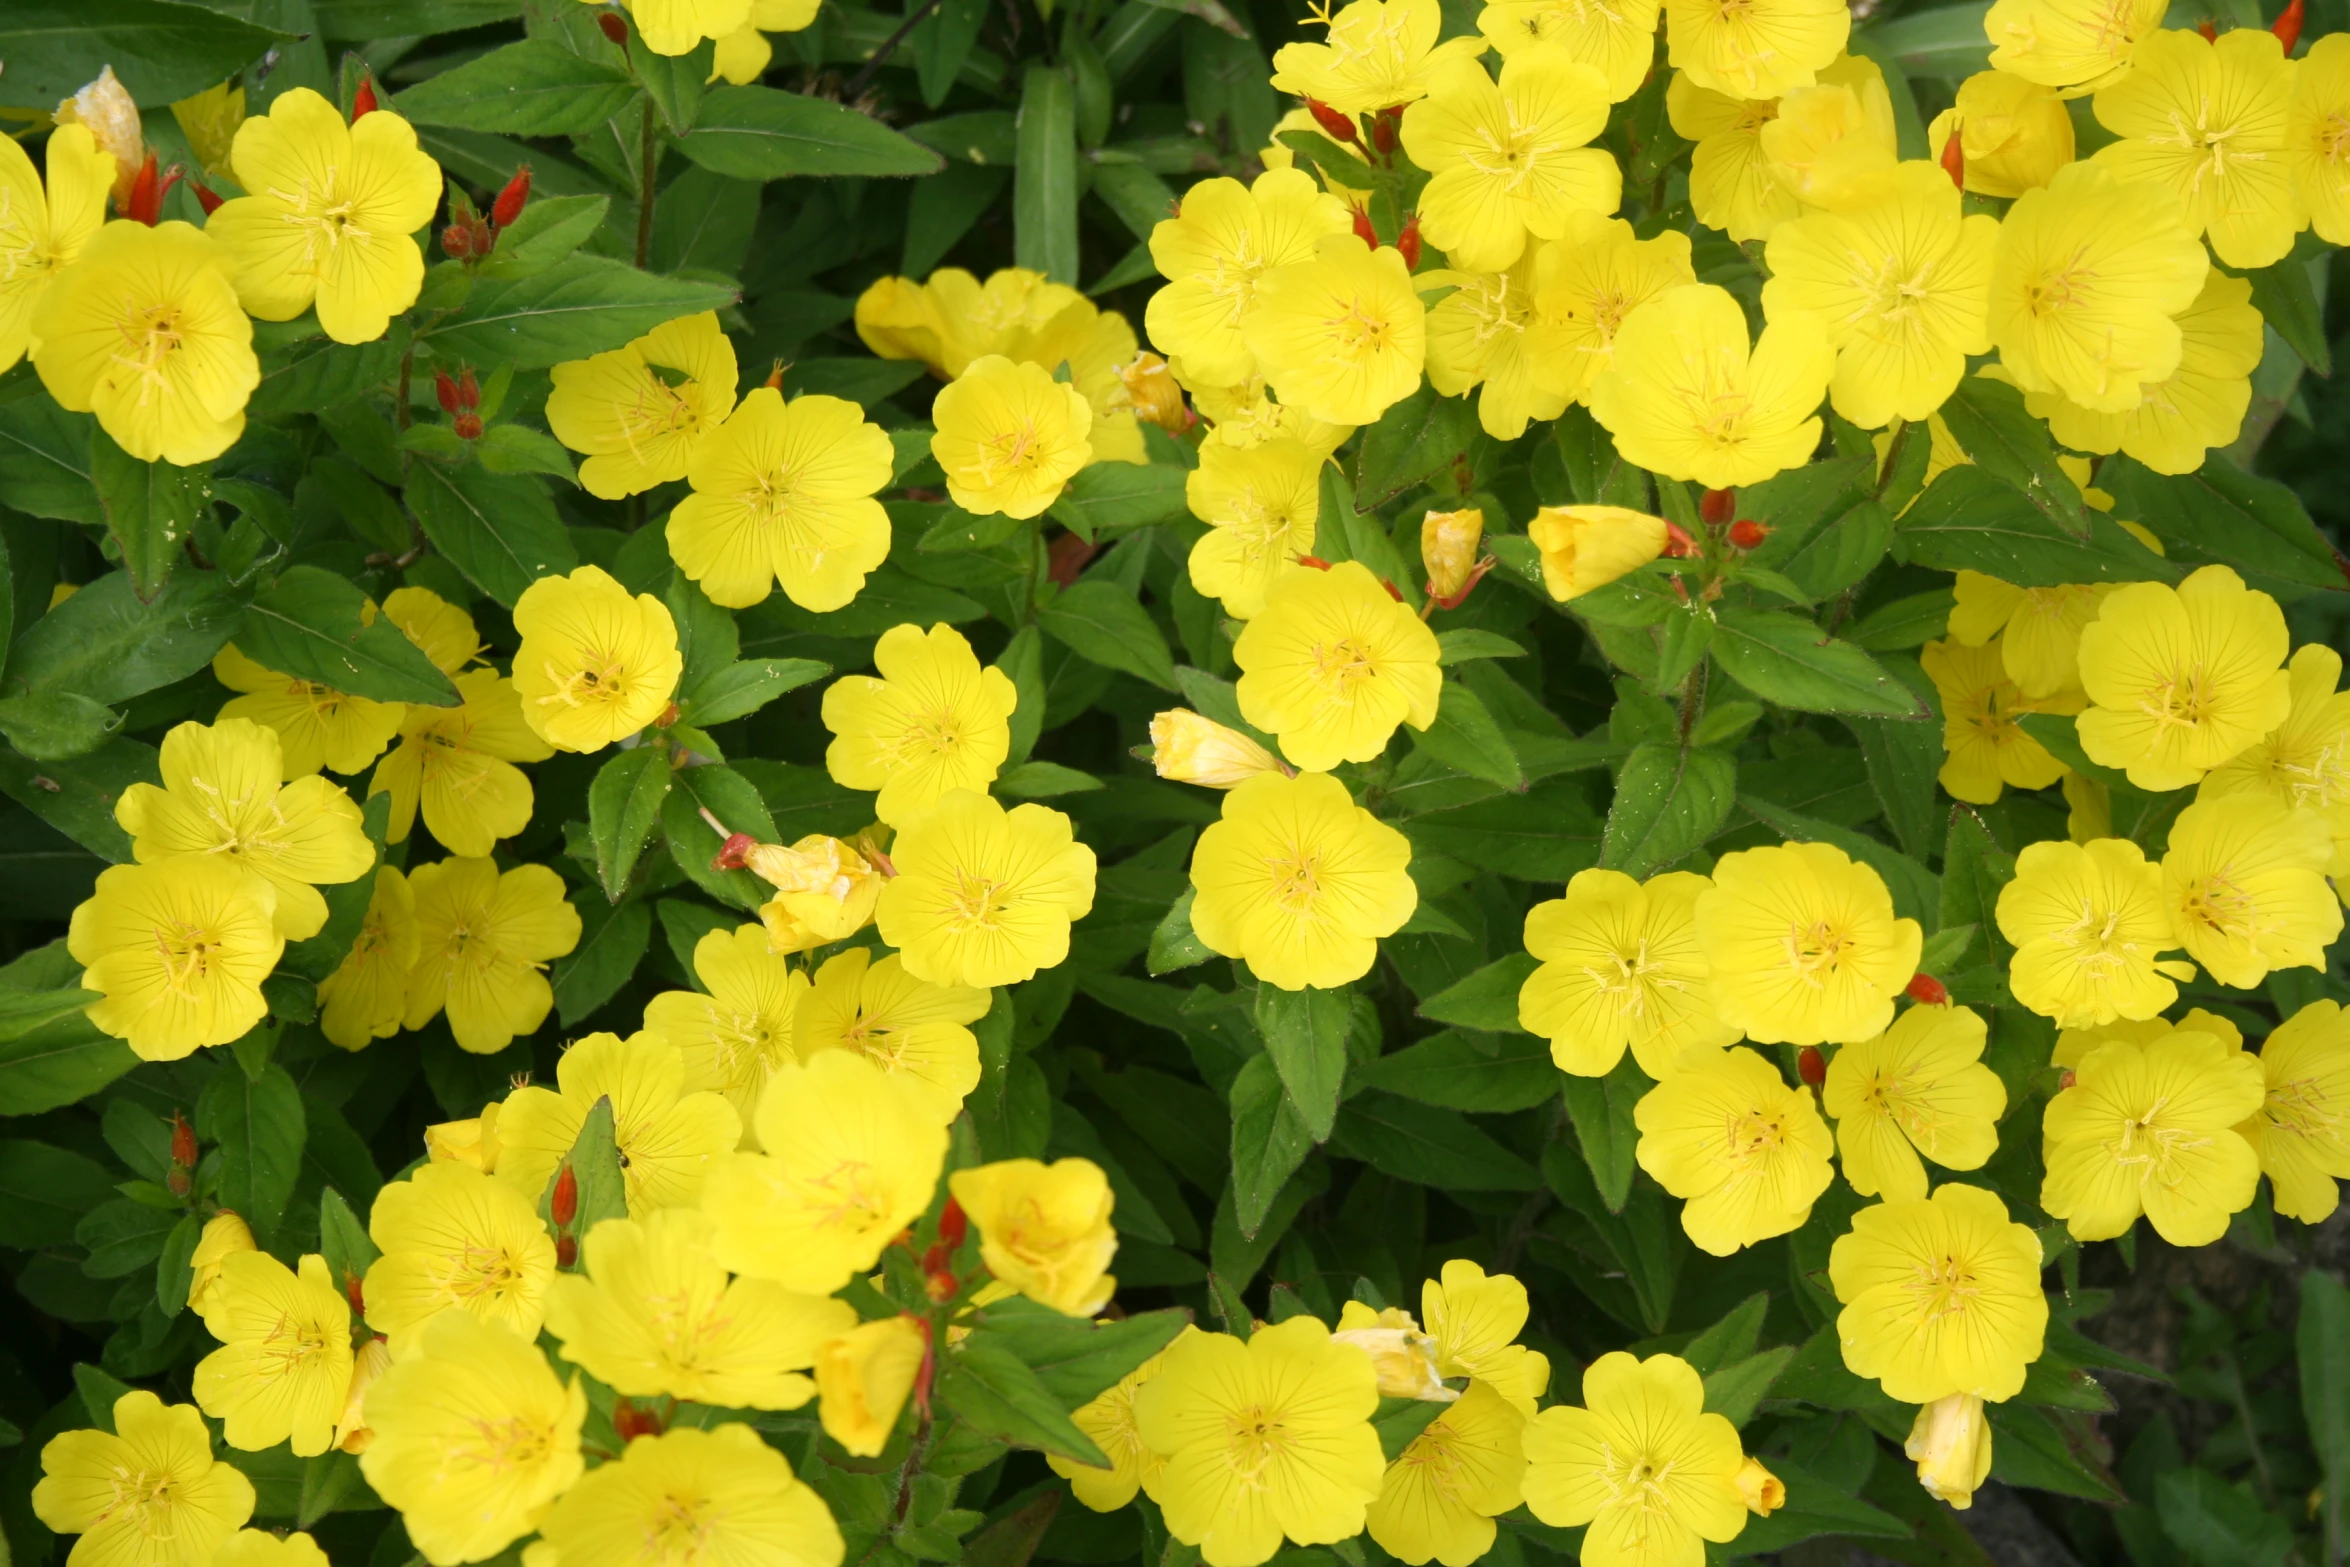 yellow flowers and green leaves growing on a bed of grass